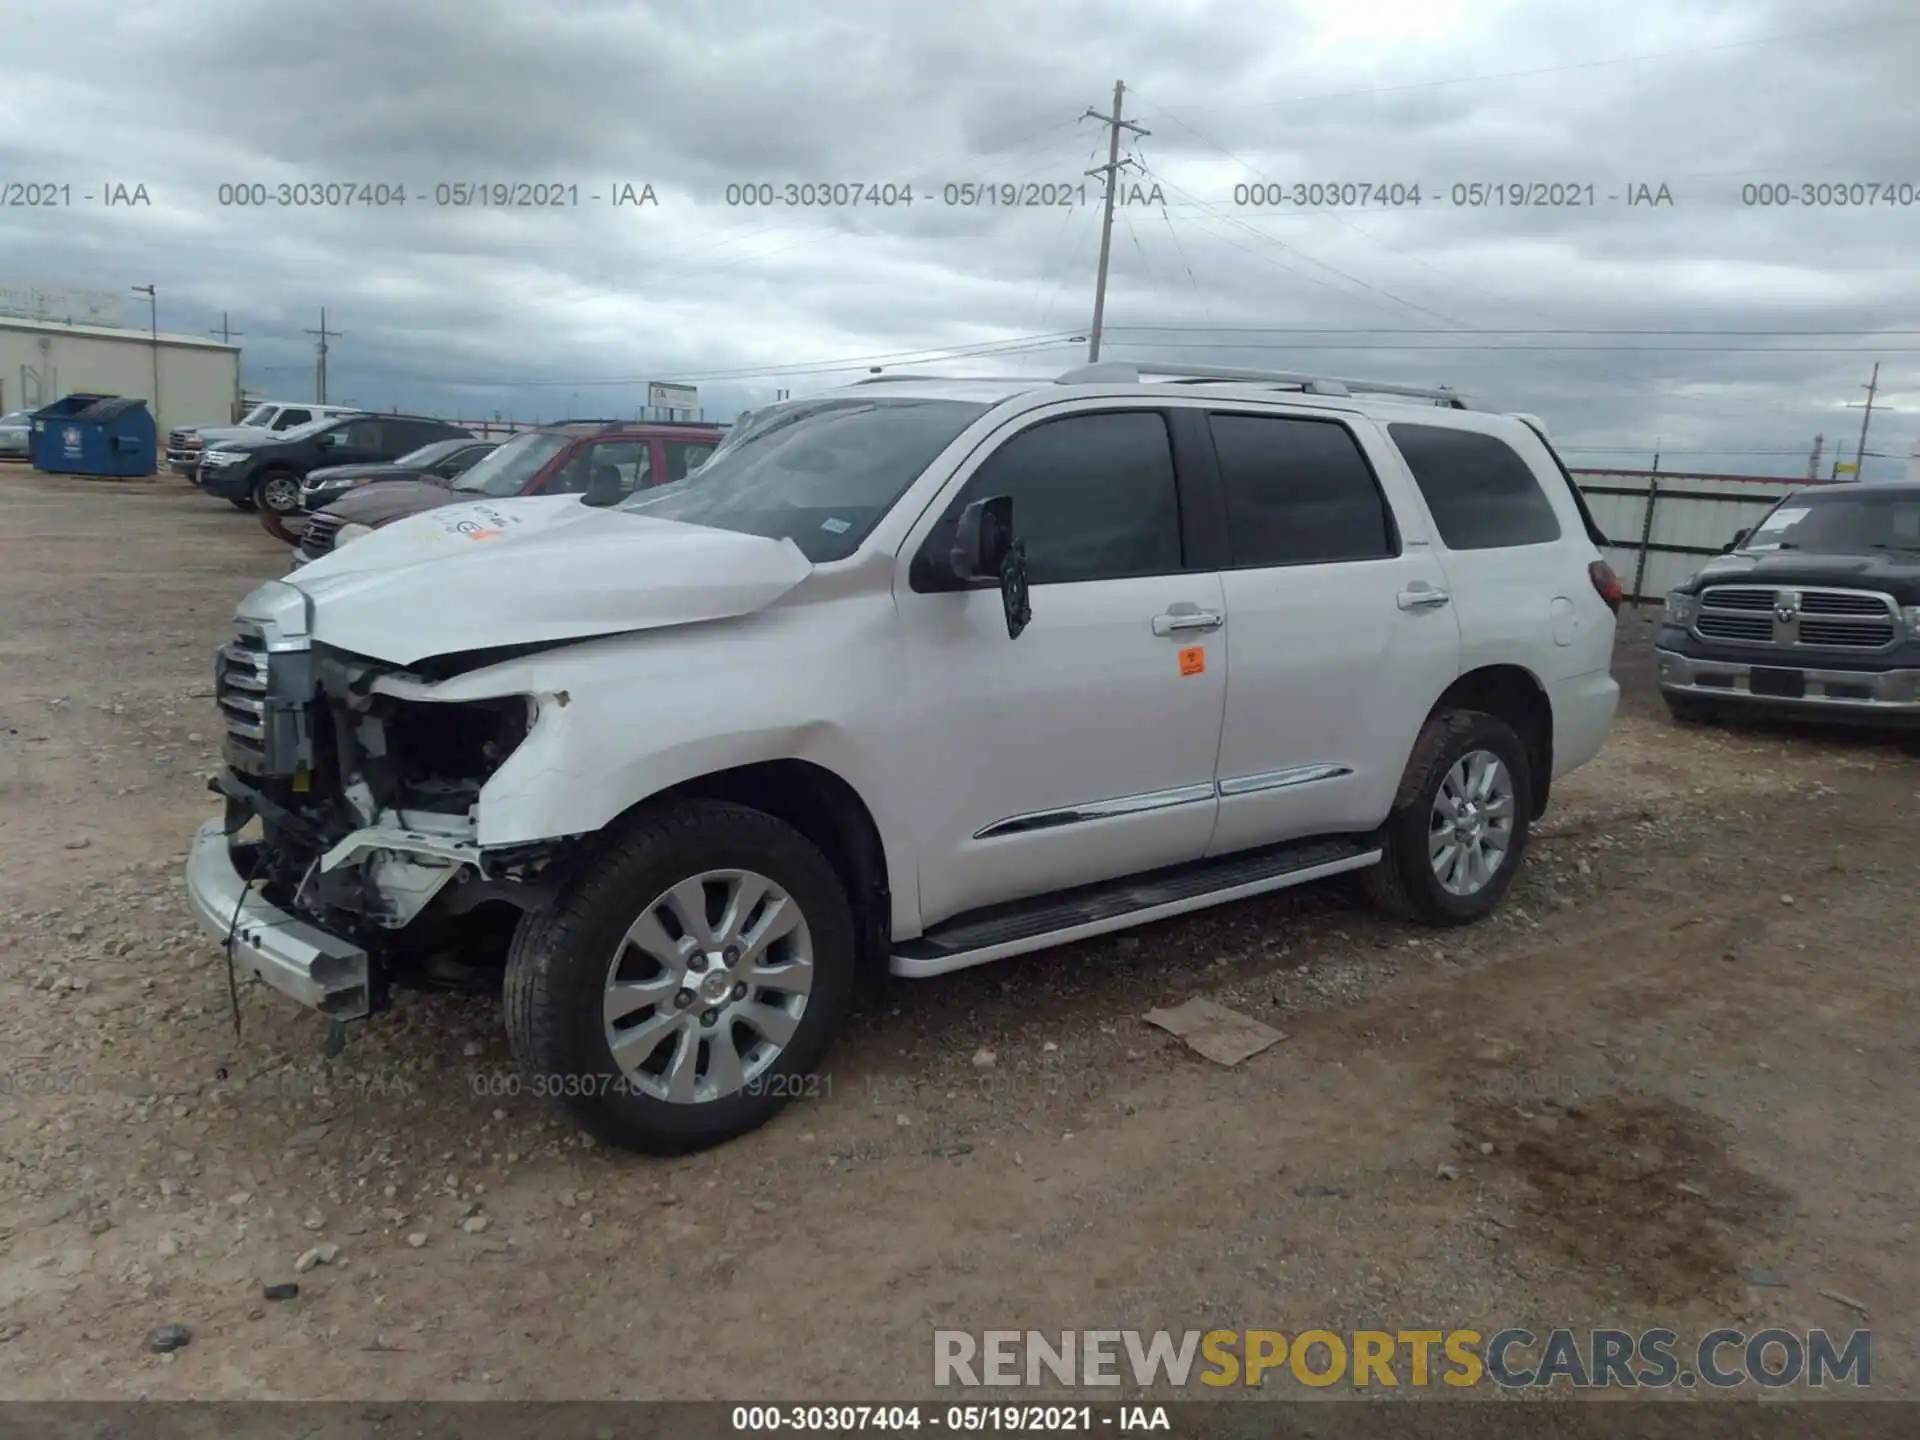 2 Photograph of a damaged car 5TDYY5G14LS074823 TOYOTA SEQUOIA 2020